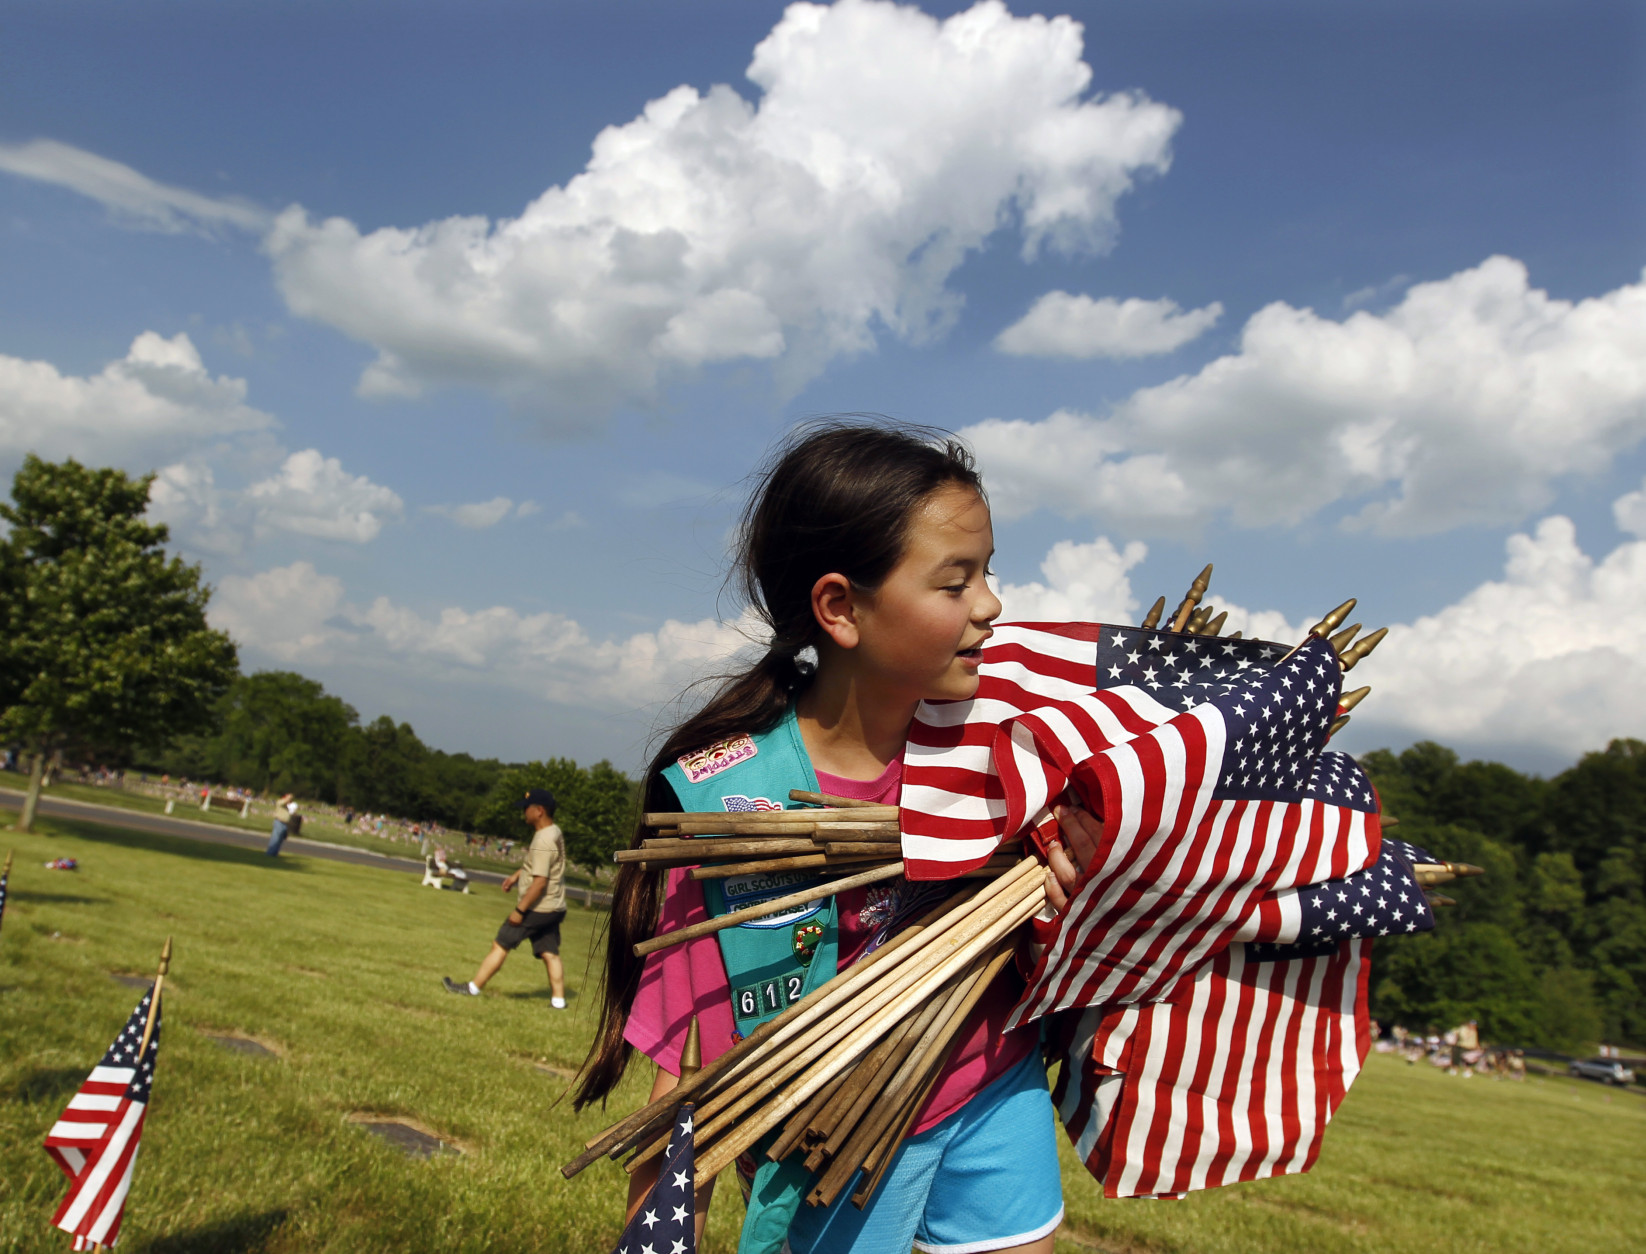 Girl Scout Megan Lontoc, 10, has her arms full of Flags as scouts placed thousands of flags on veteran's graves at Brig. Gen. William C. Doyle Veterans Memorial Cemetery in honor of Memorial Day, Friday, May 27, 2016, in Wrightstown N.J. (AP Photo/Mel Evans)